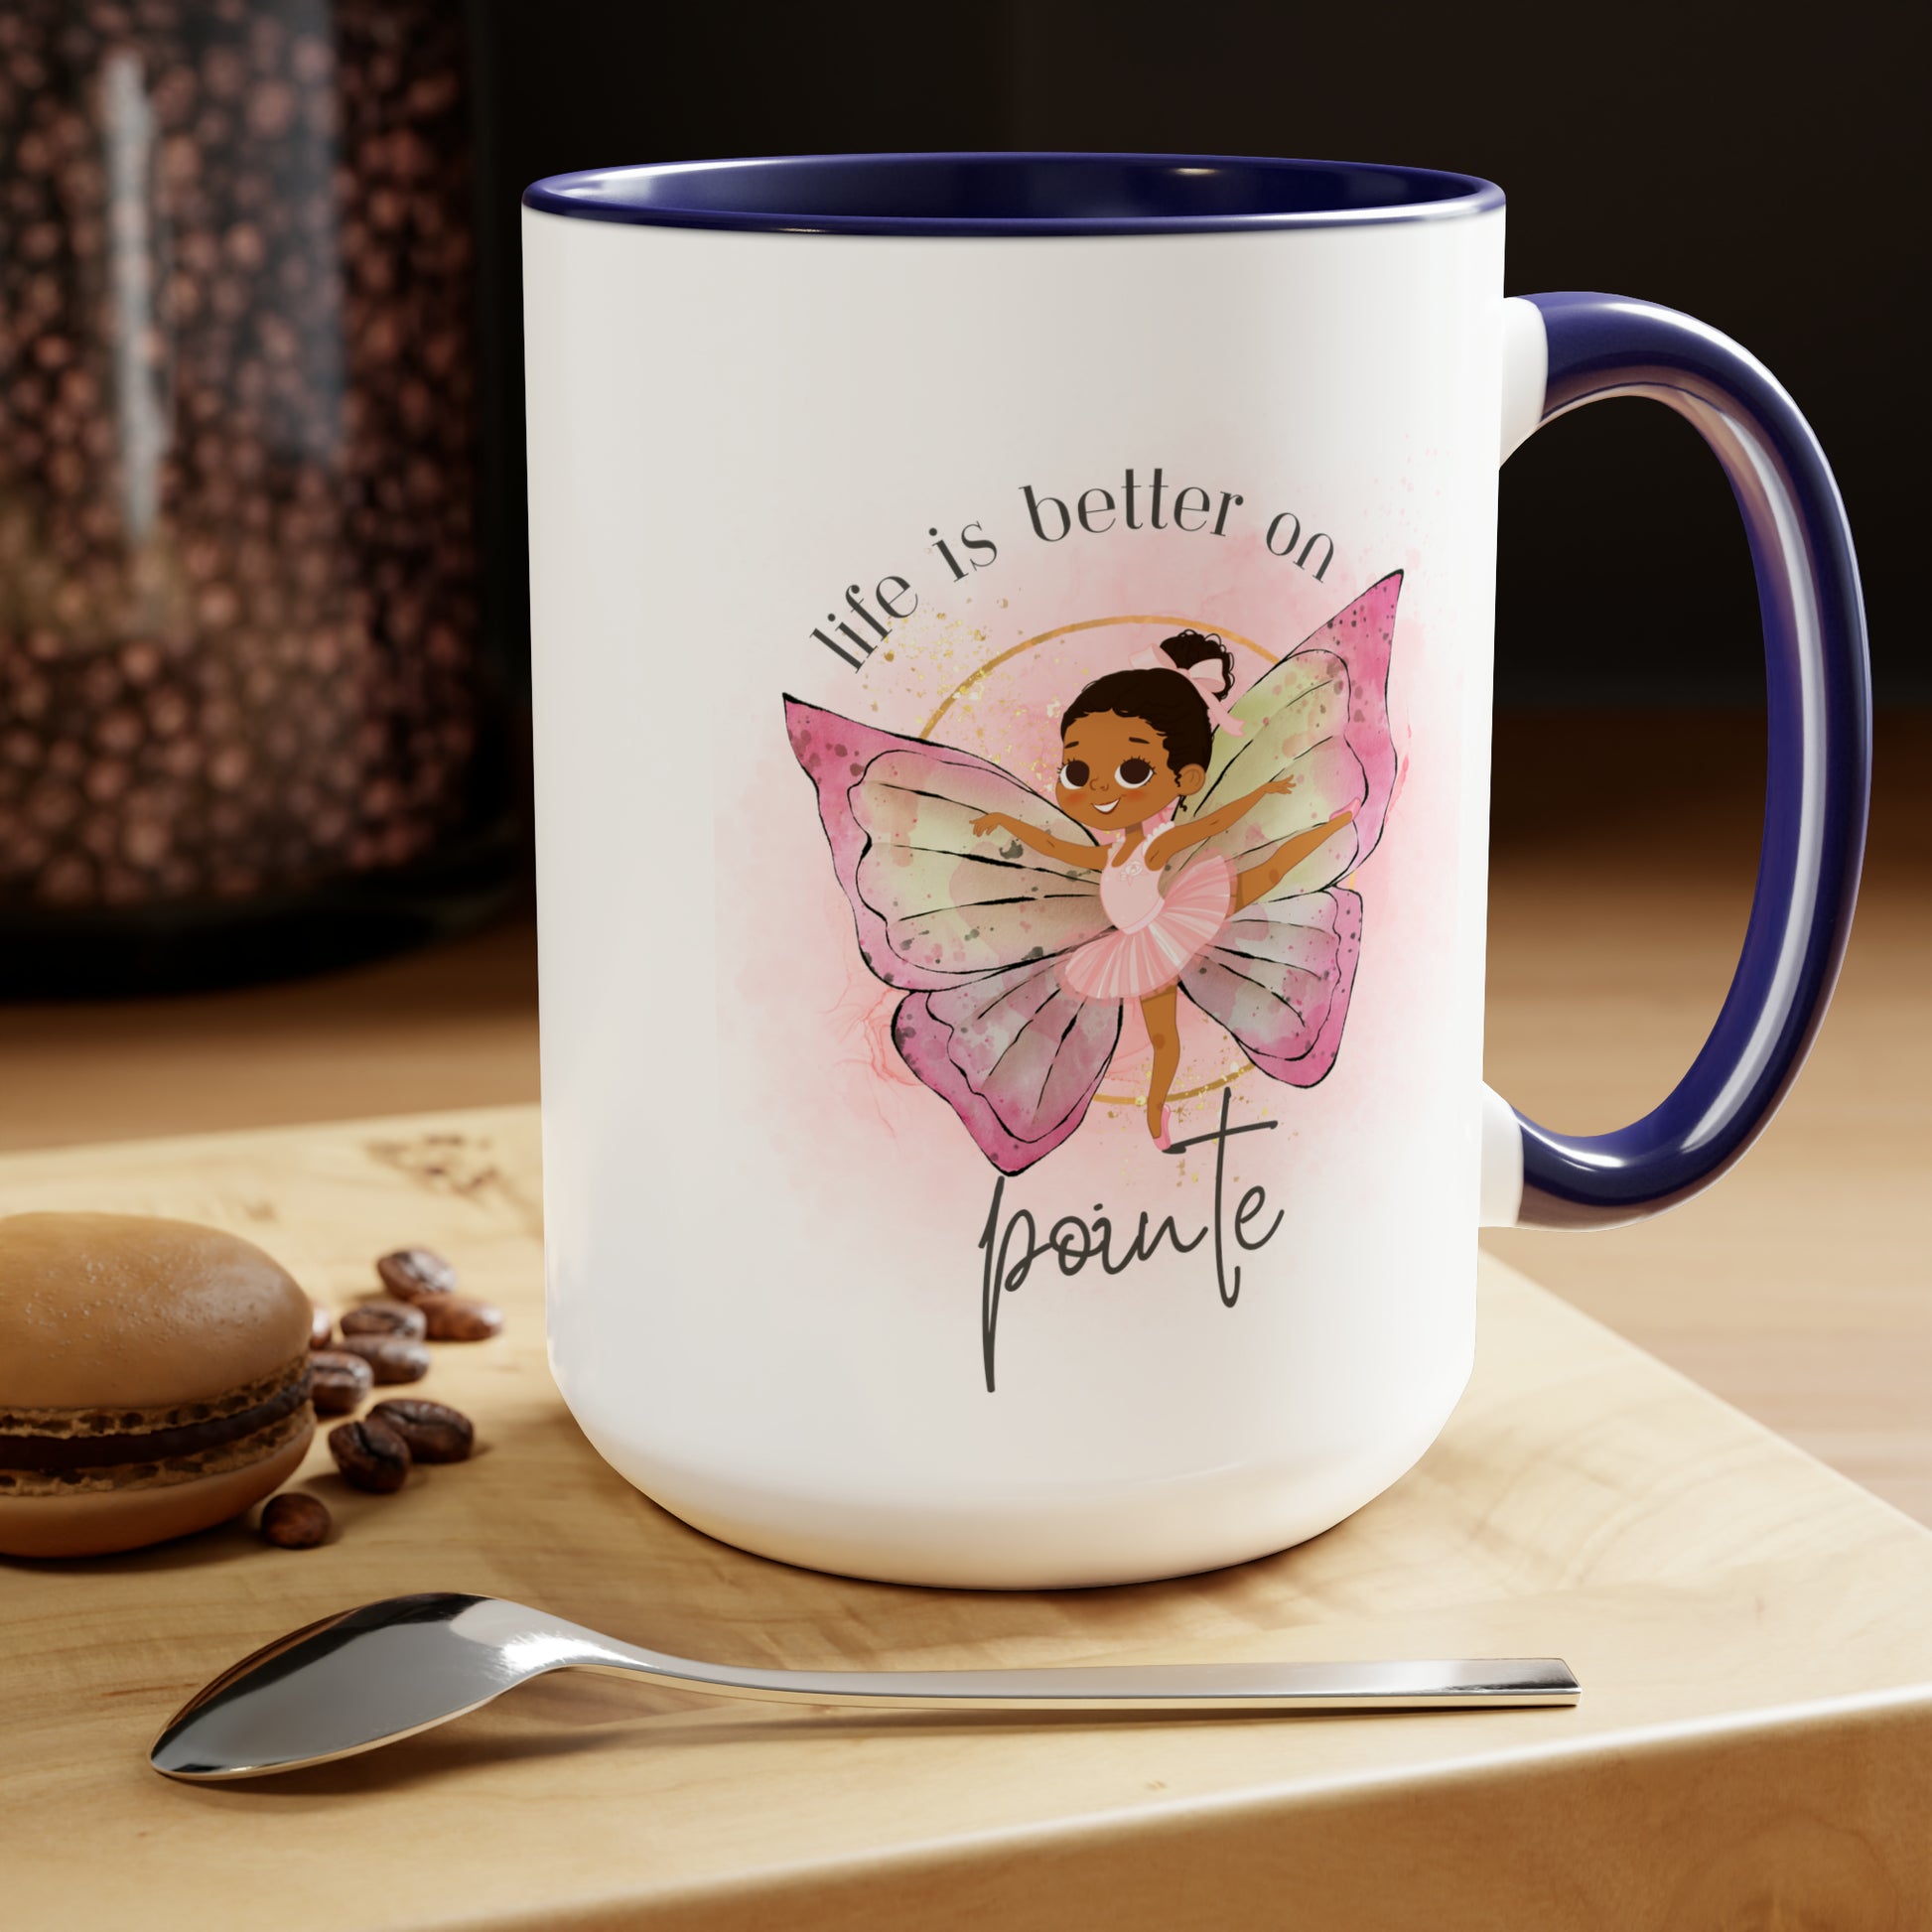 Two-Tone Coffee Mugs, 15oz - Young Ballerina - Life is better on pointe - royal blue rim